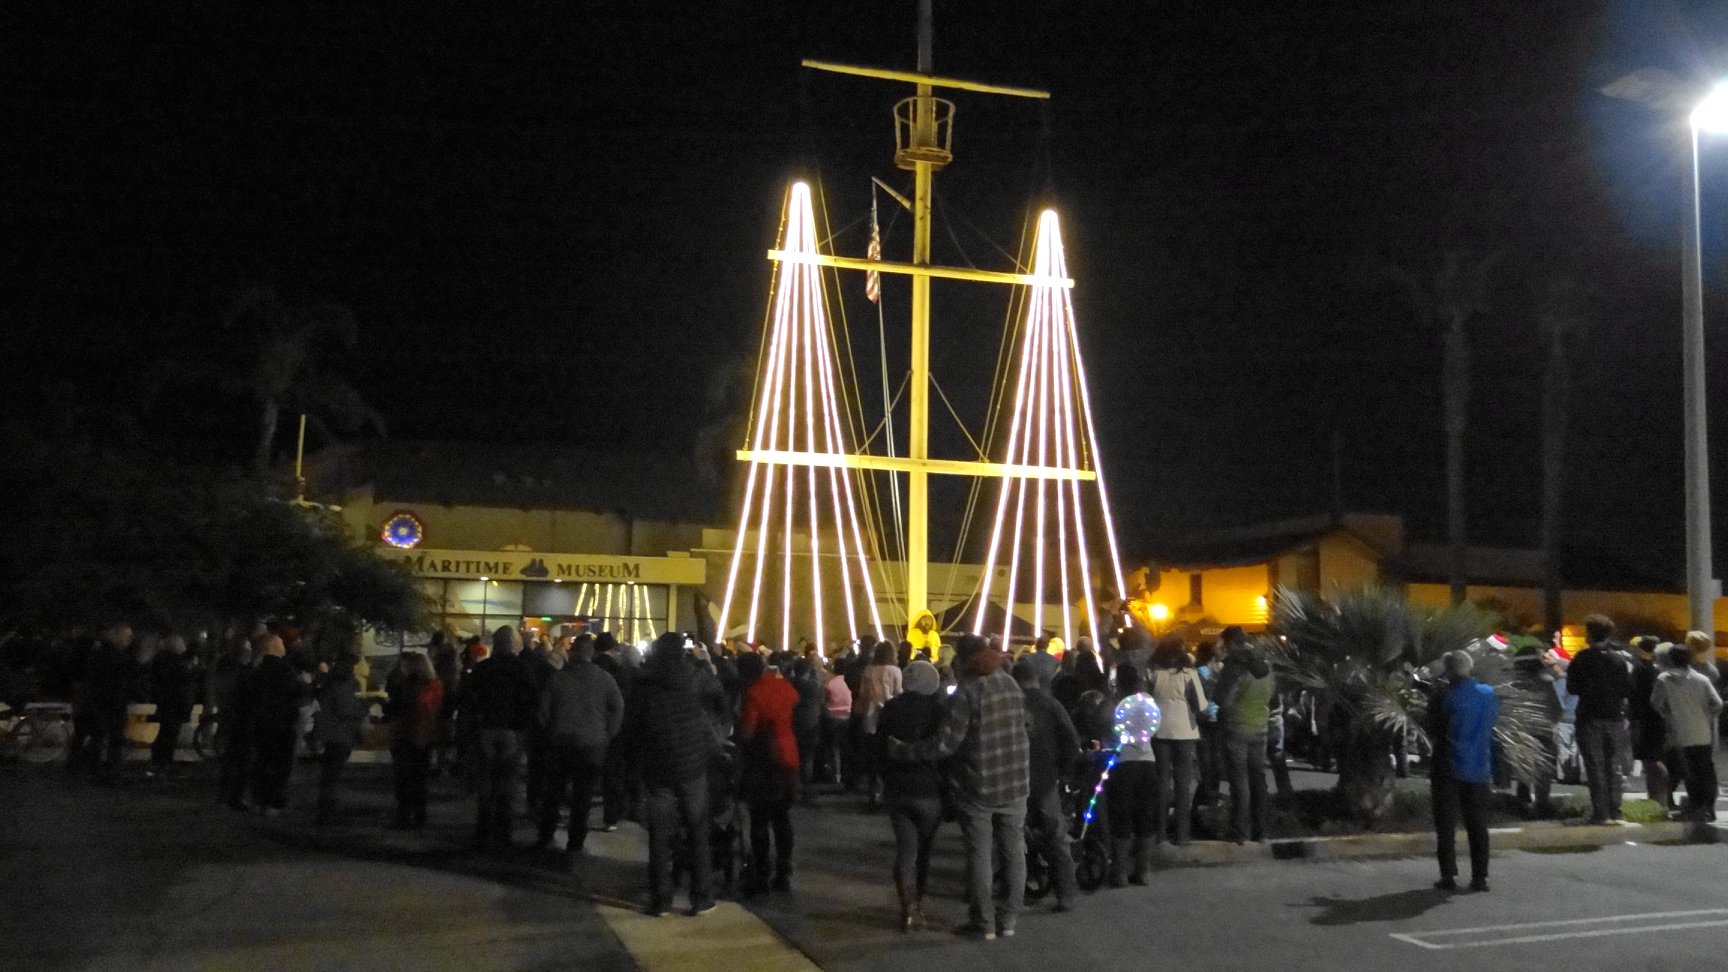 A crowd gathered to watch the 2019 Holiday Lighting of the Tall Ship Mast